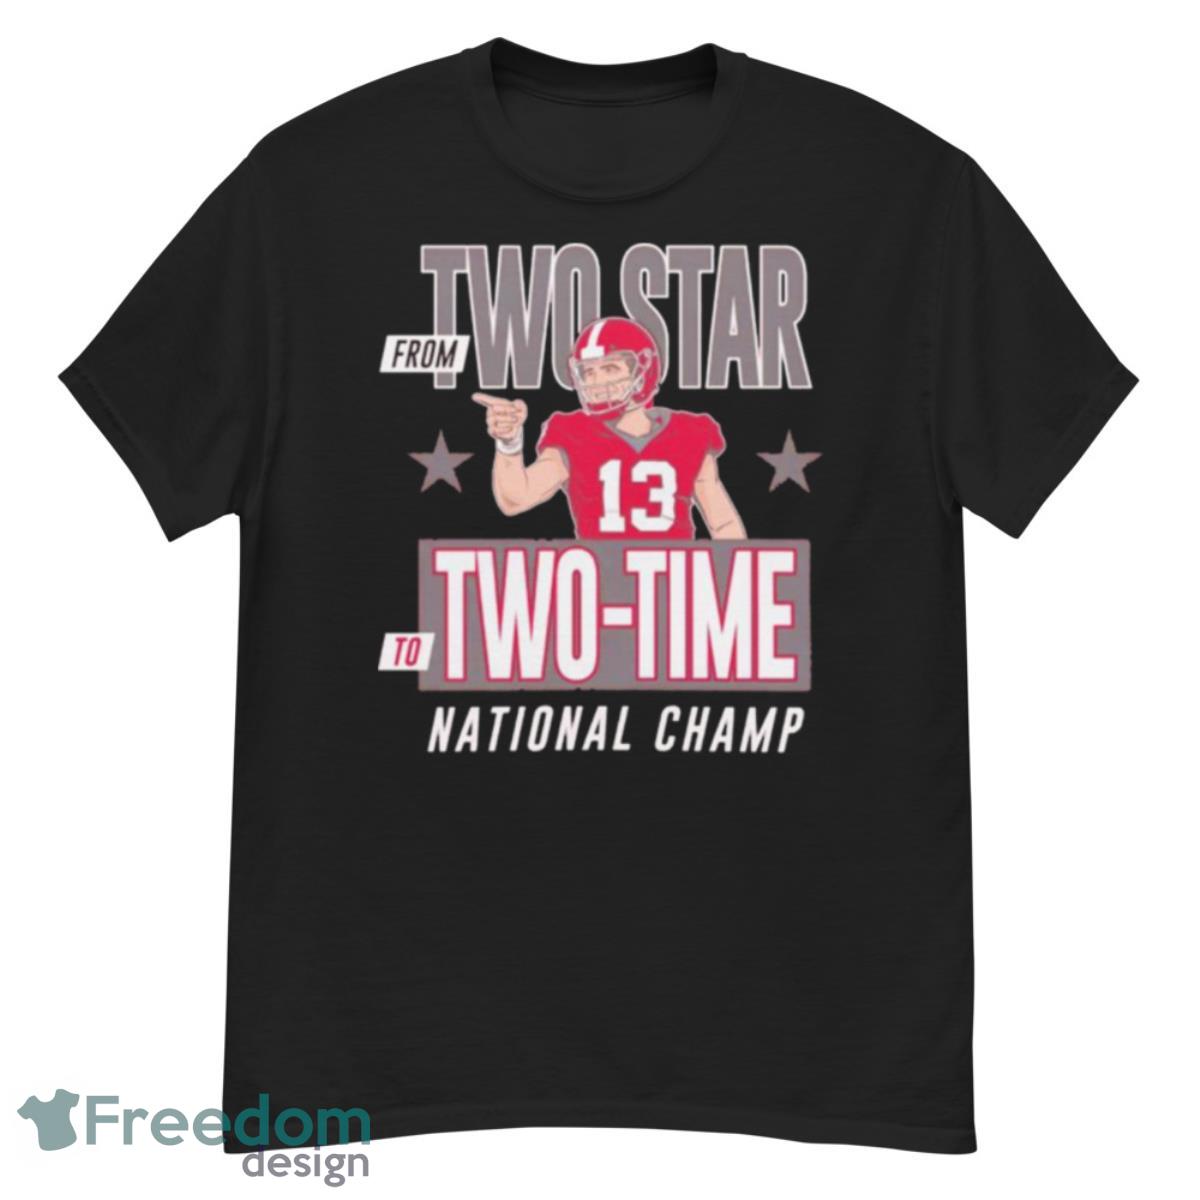 Stetson Bennett from two star to two time national champ shirt - G500 Men’s Classic T-Shirt